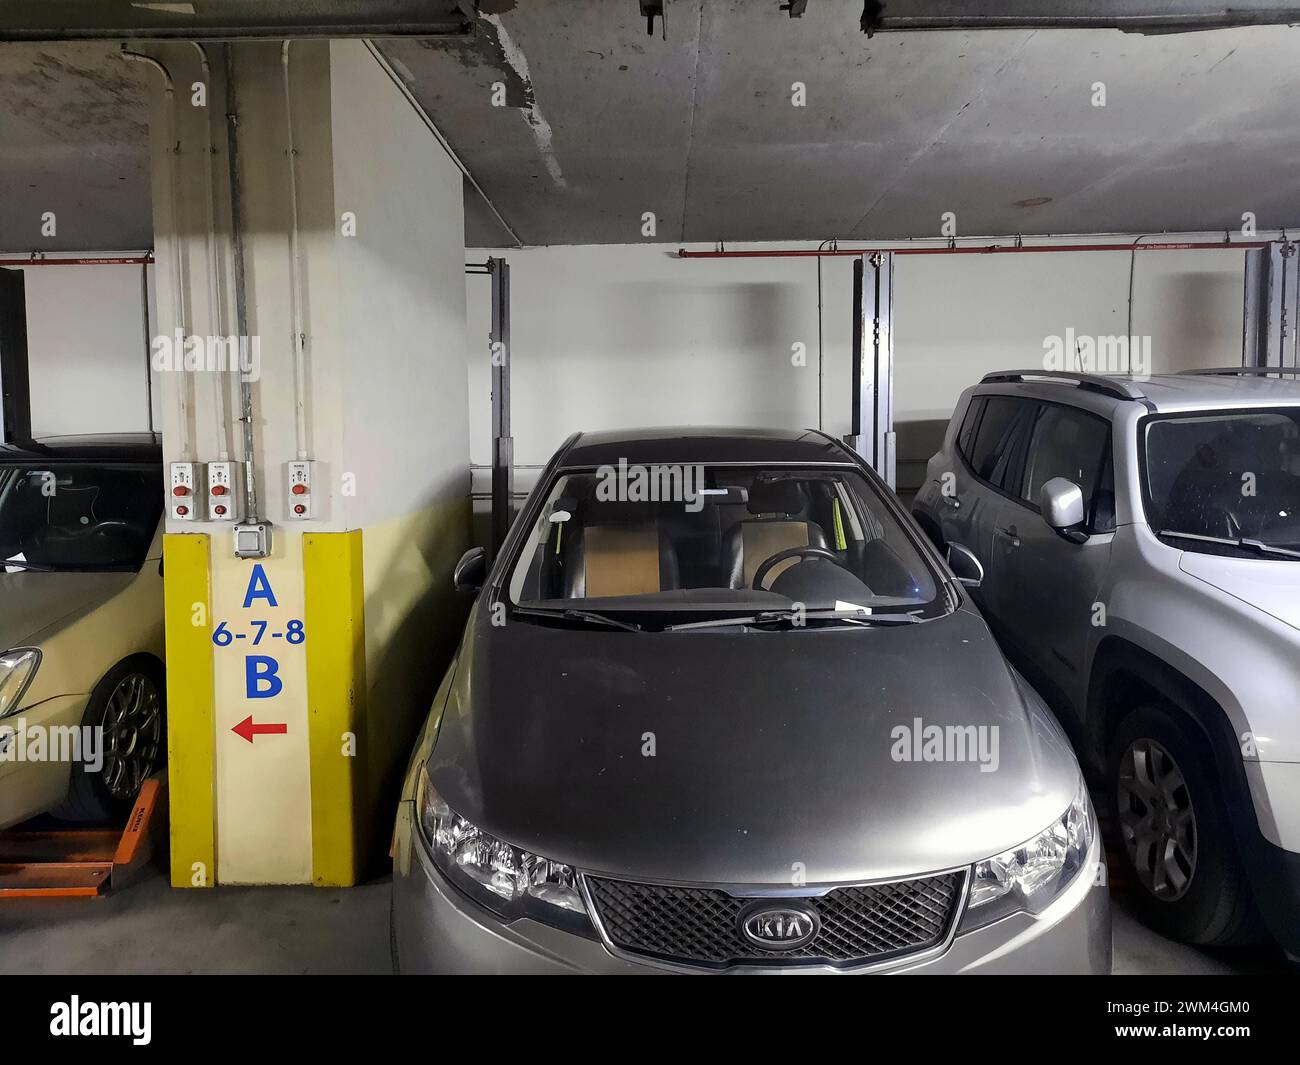 Cairo, Egypt, January 11 2024: Klaus multiparking system in a garage, one of the leading manufacturers of parking systems in the world for over 50 yea Stock Photo